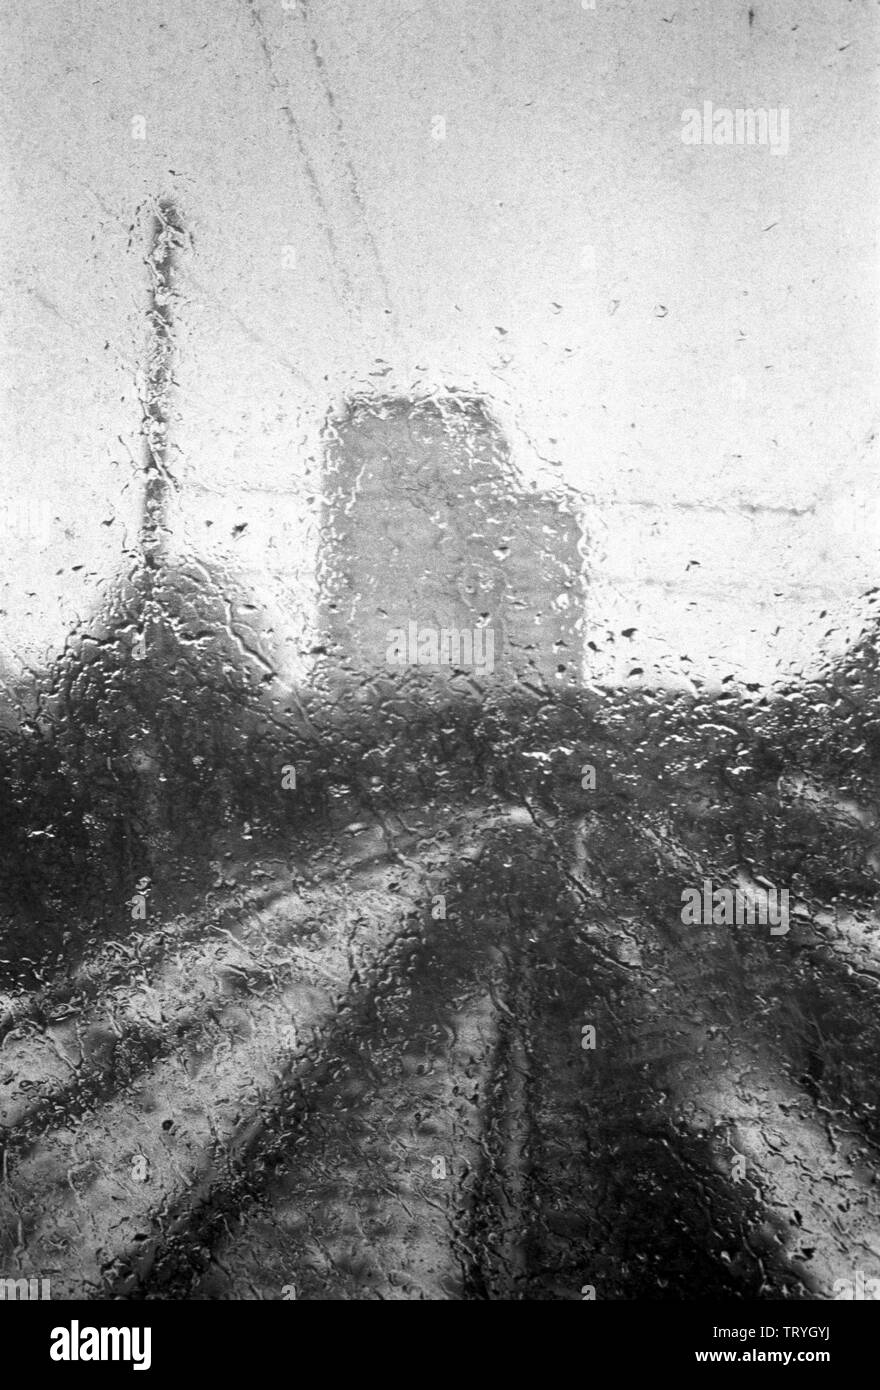 Black and white picture of a rainy day in a city Stock Photo